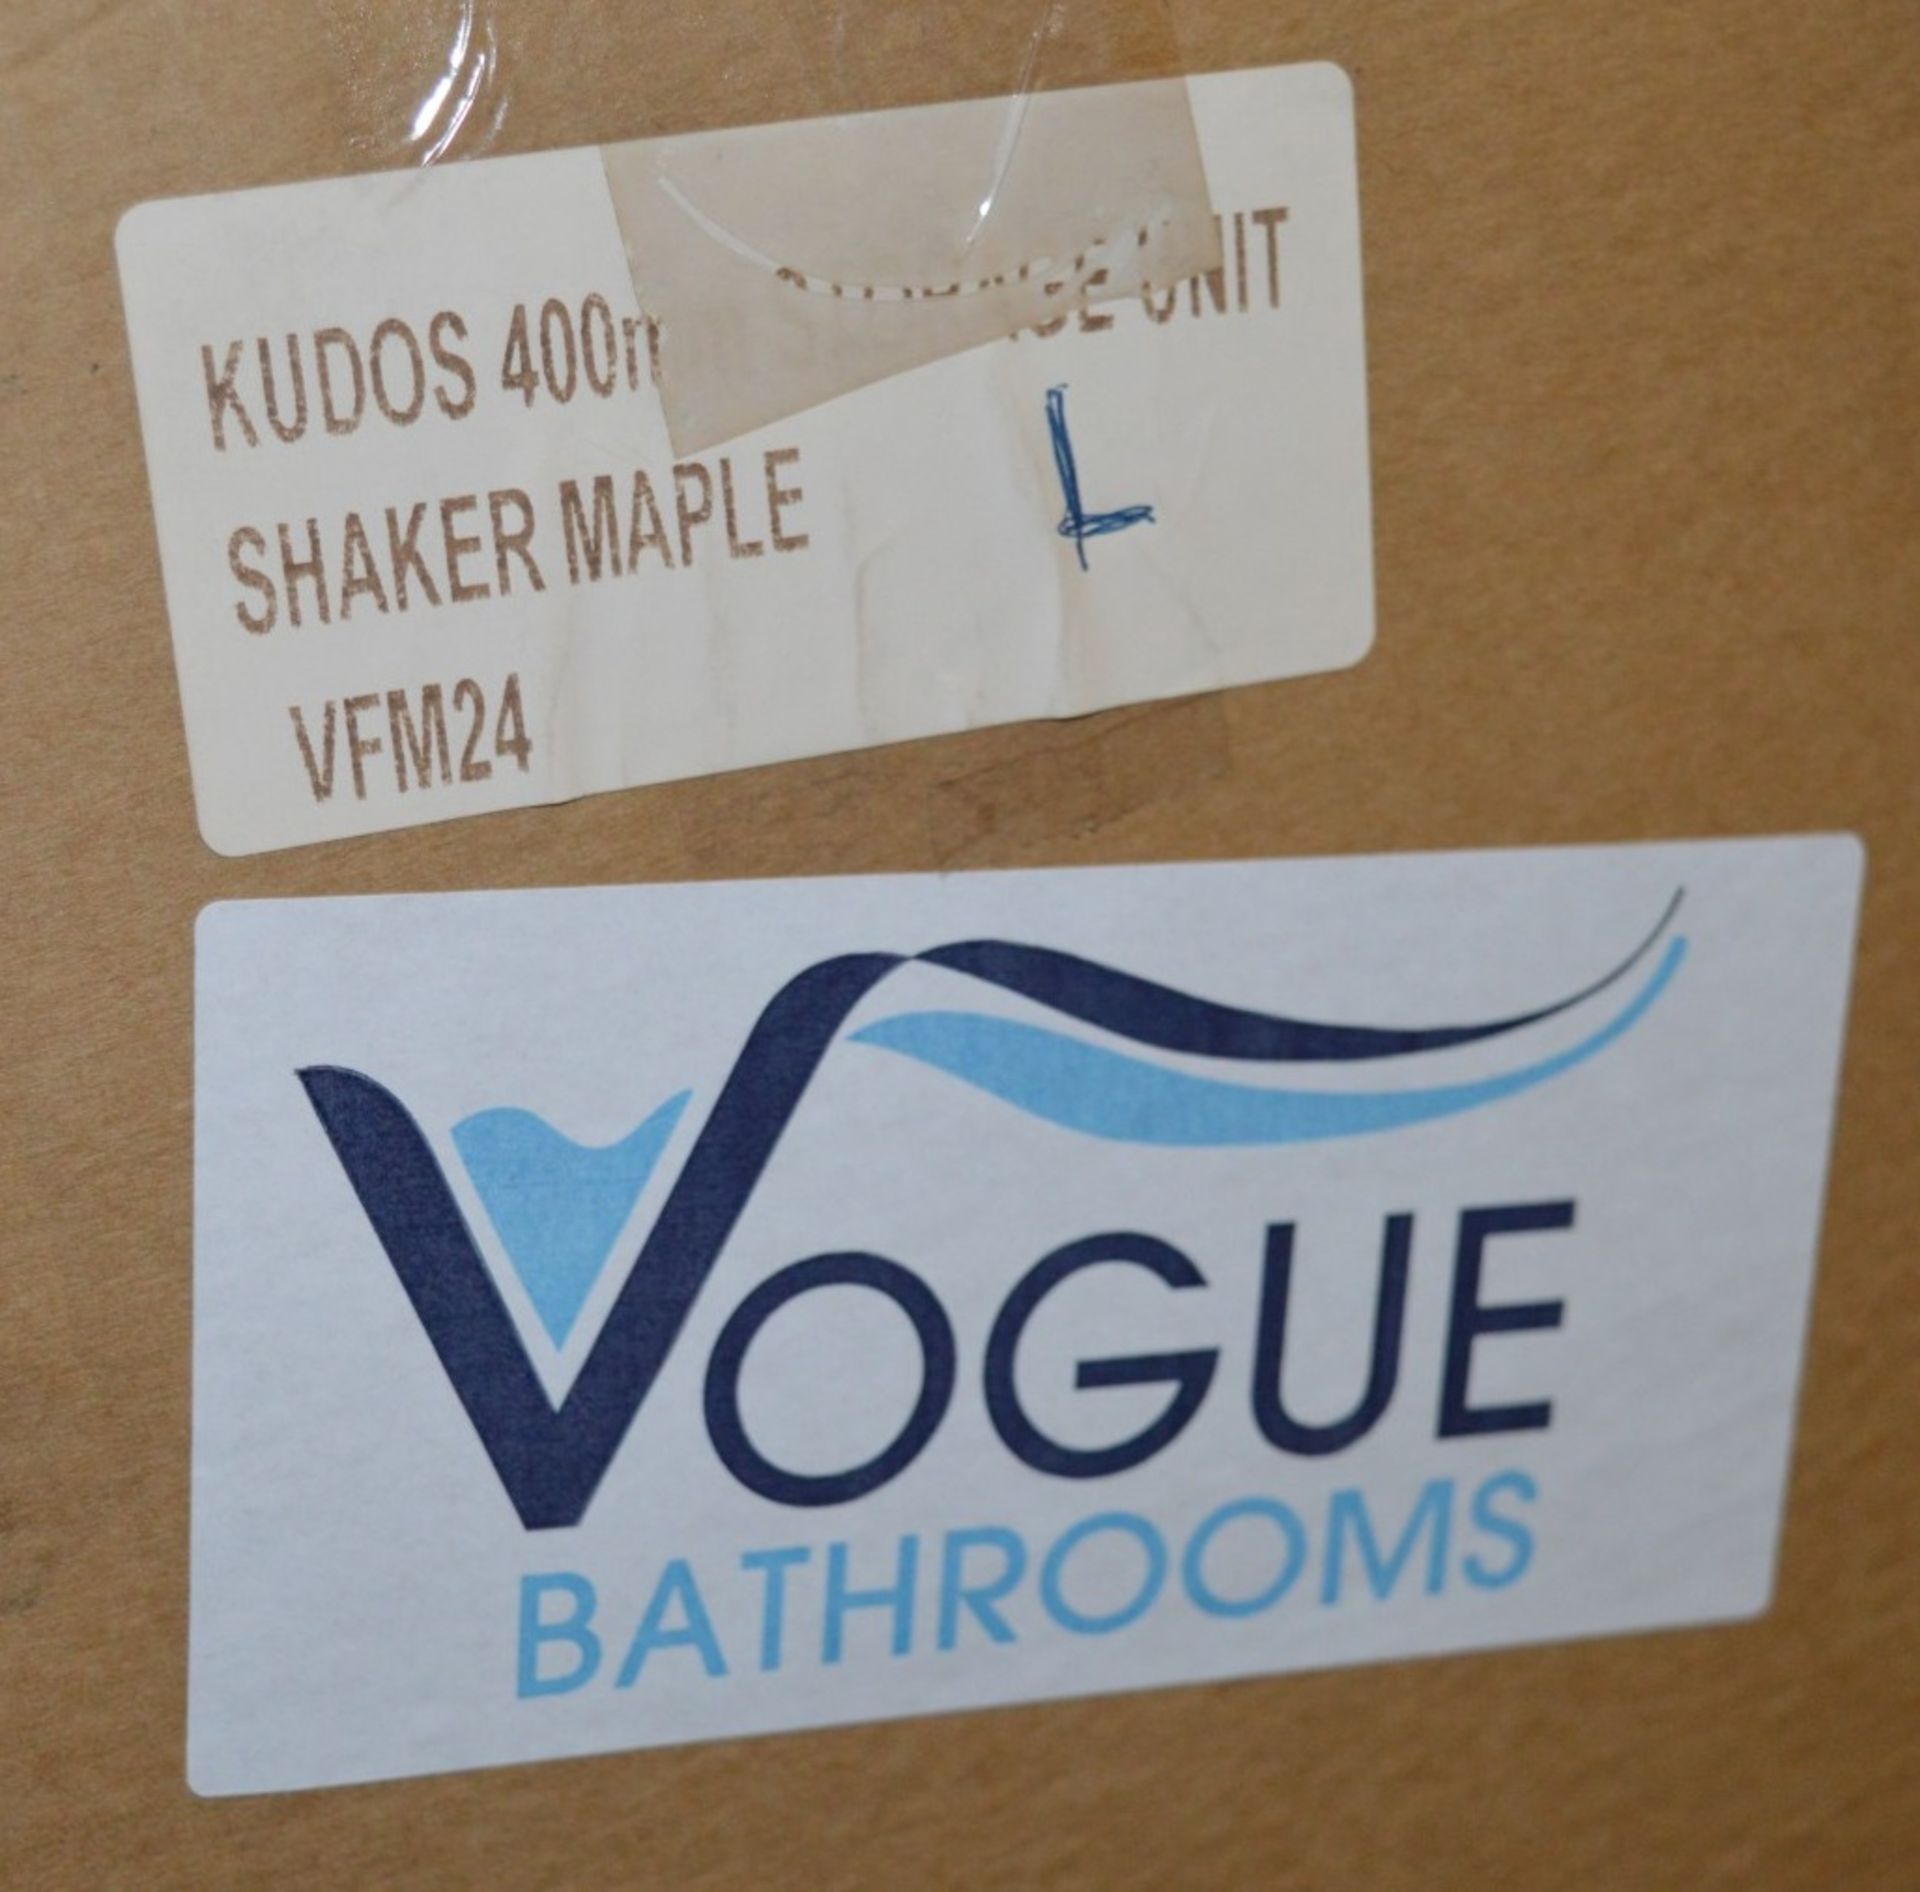 1 x Vogue Bathrooms KUDOS Bathroom Storage Cabinet - 400mm Width - Maple Shaker Style - Crafted With - Image 2 of 11